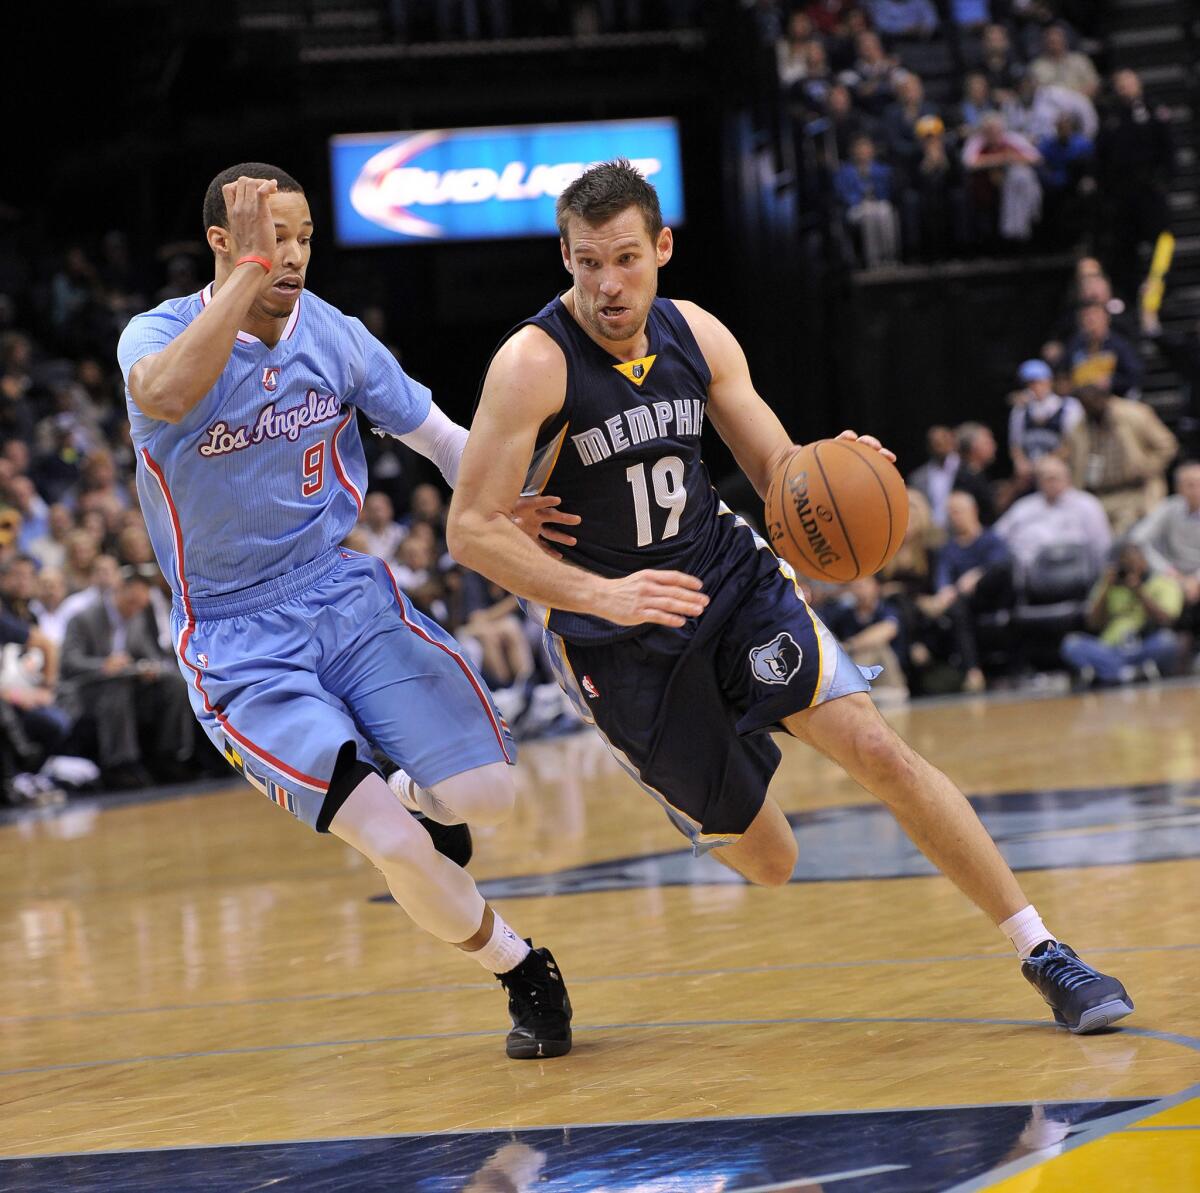 Memphis guard Beno Udrih drives past Clippers guard Jared Cunningham during a game on Nov. 23. The Clippers on Wednesday traded Cunningham to the Philadelphia 76ers.